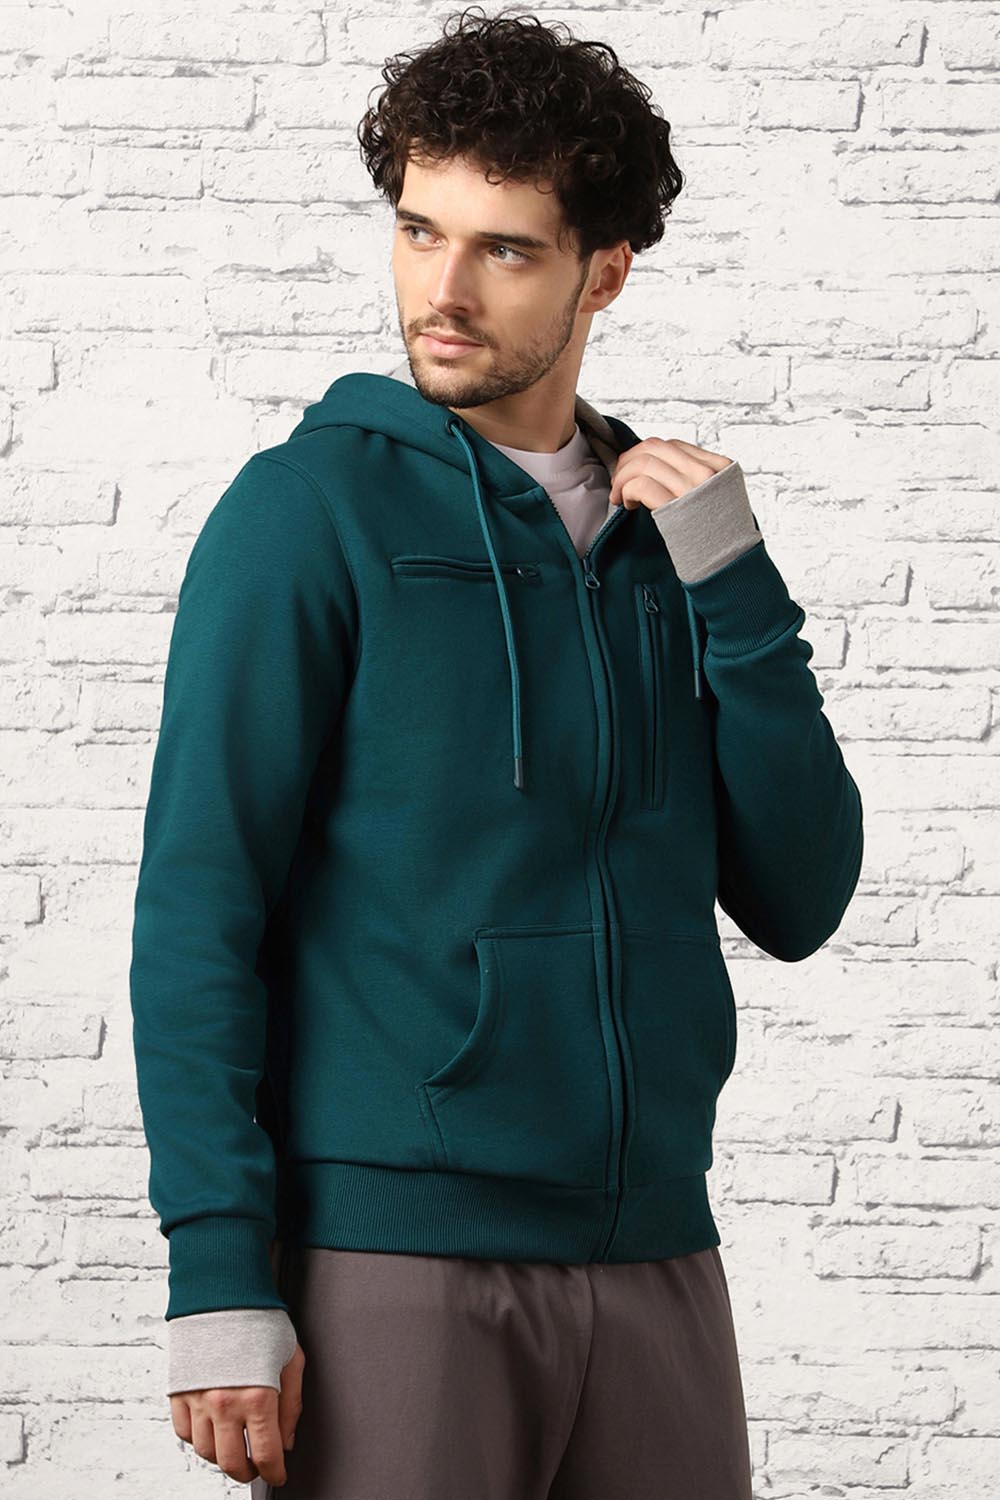 Clever Travel Companion Pickpocket Proof Travel Hoodie with 4